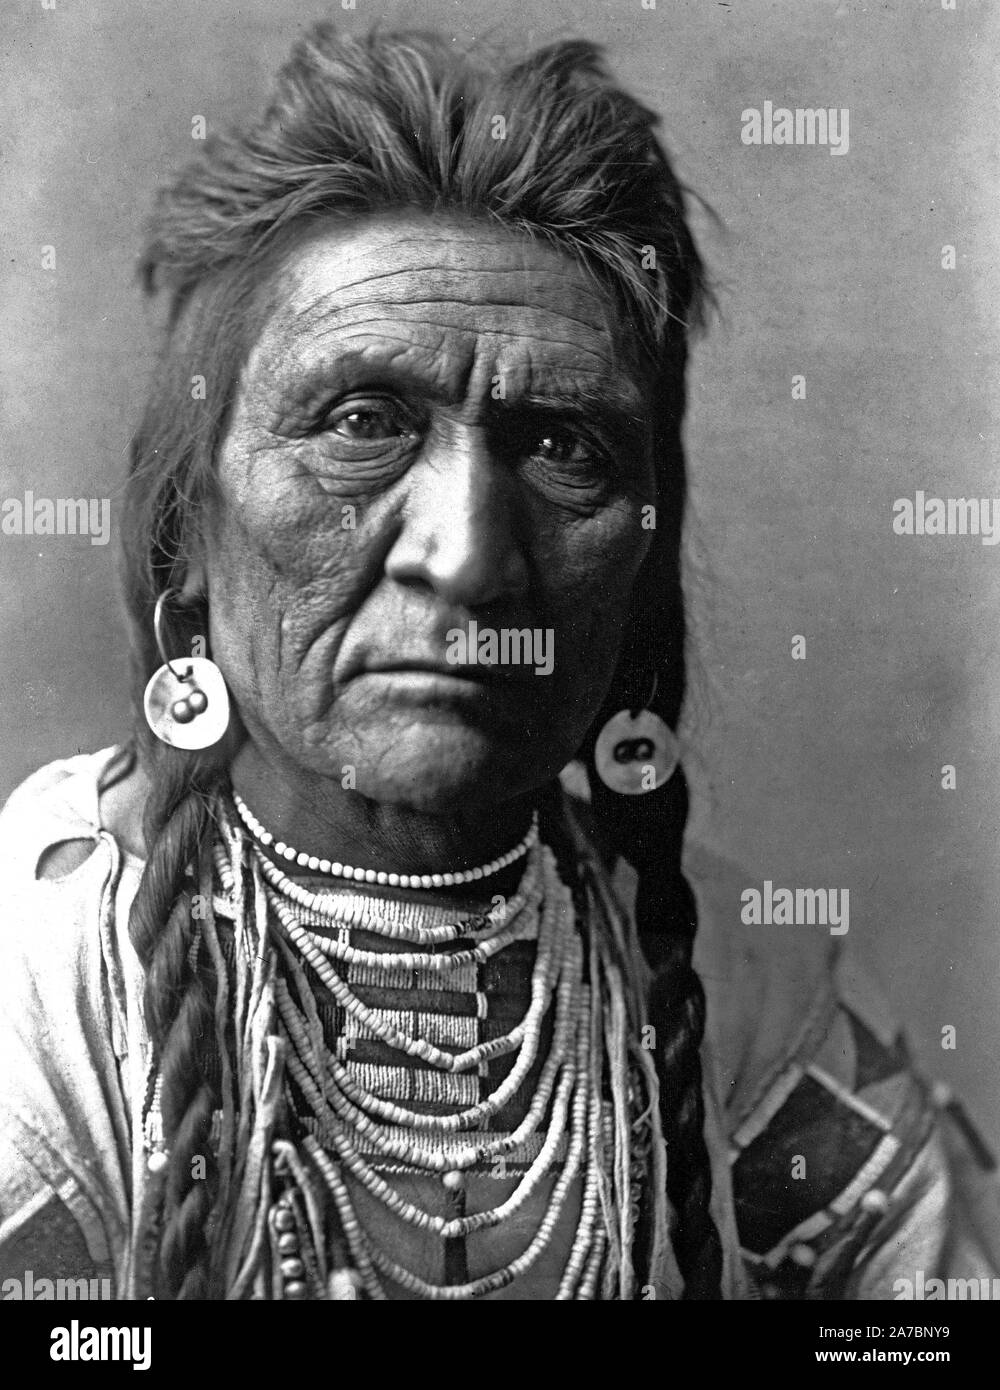 Edward S. Curtis Native American Indians - Crow Inder Ca. 1908 Stockfoto